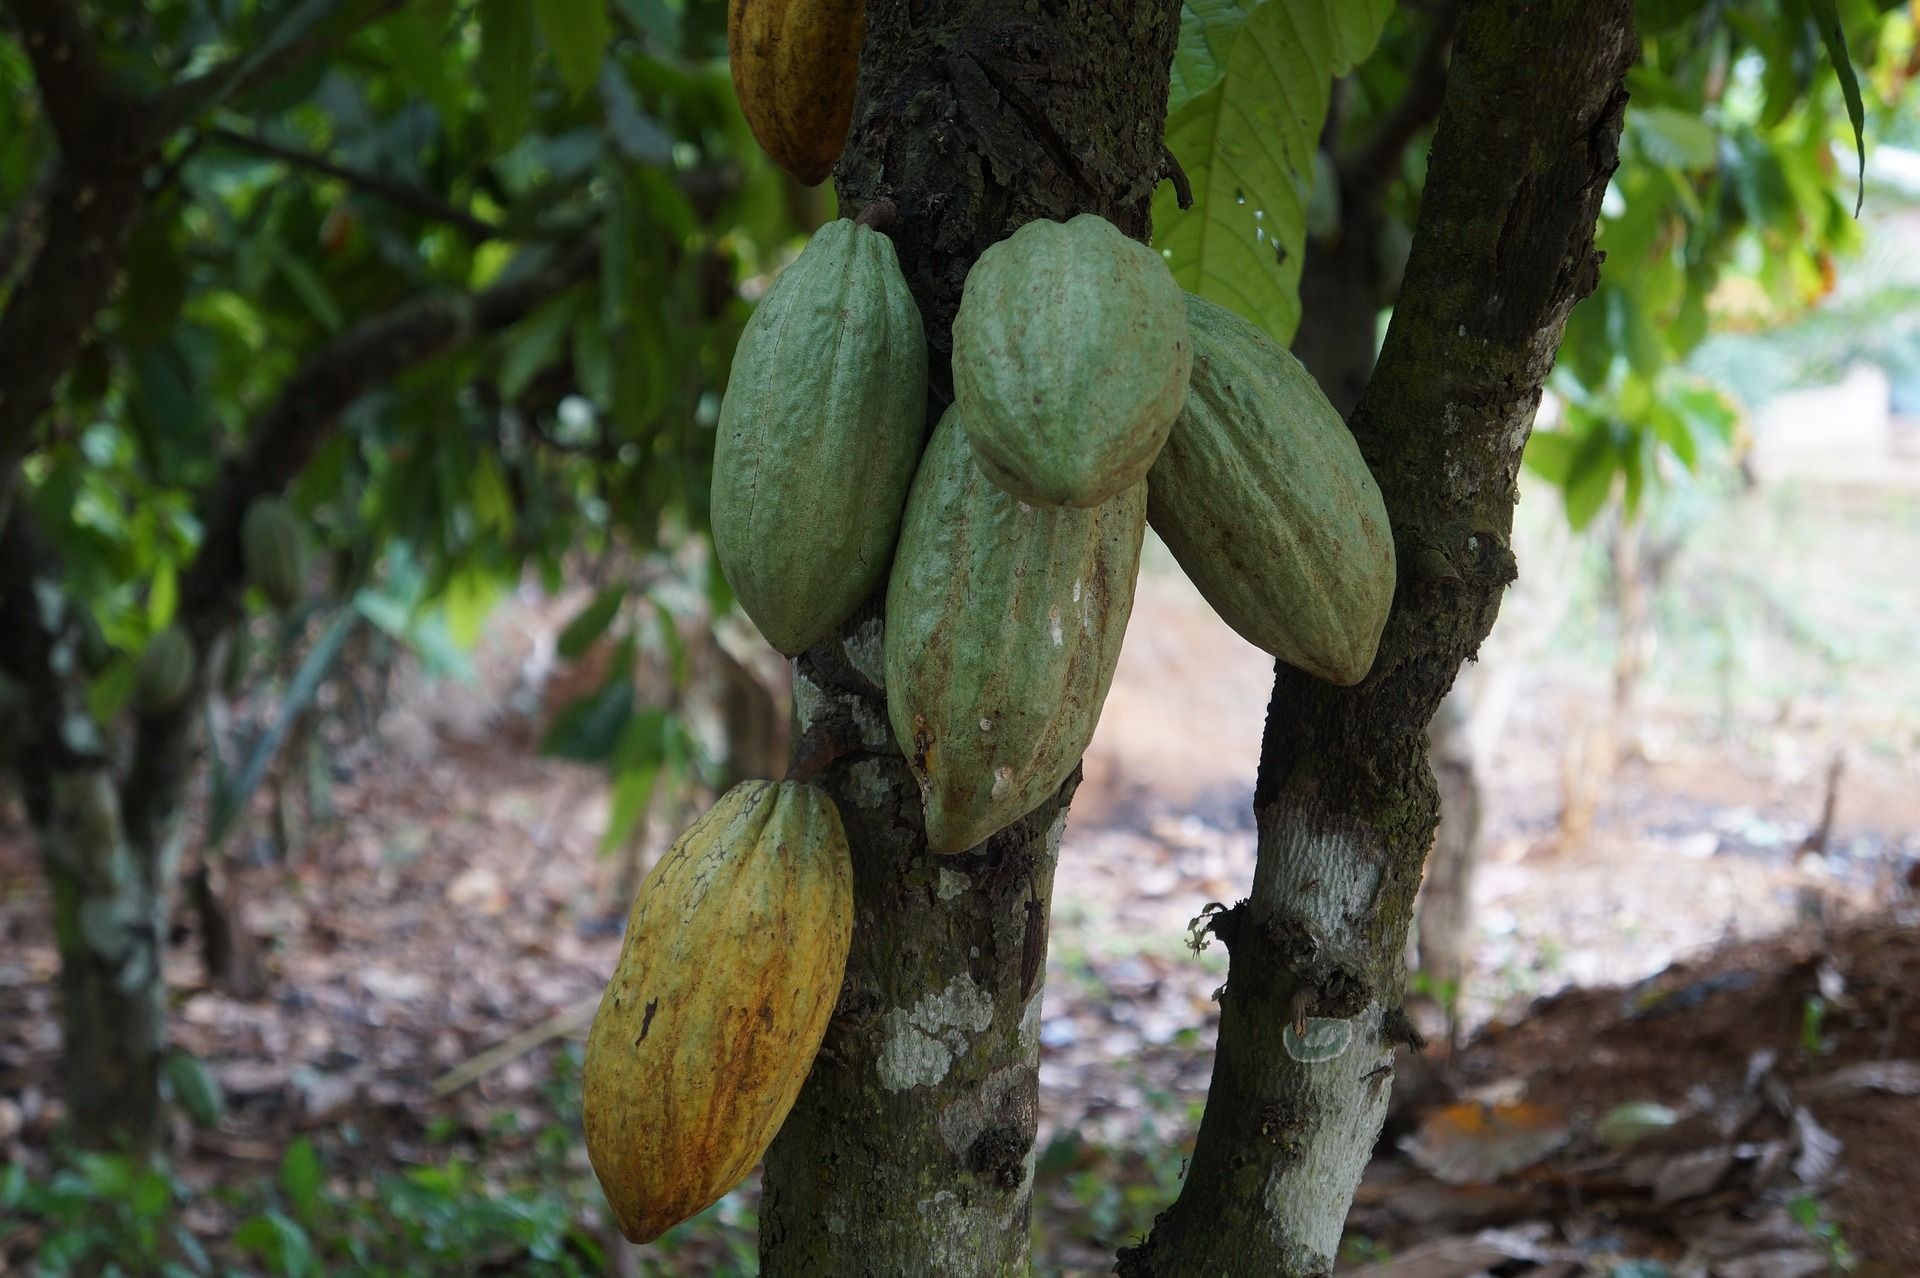 Trase insights, Cocoa exports, Cte d'Ivoire and Ghana, Global trade, 1920x1280 HD Desktop